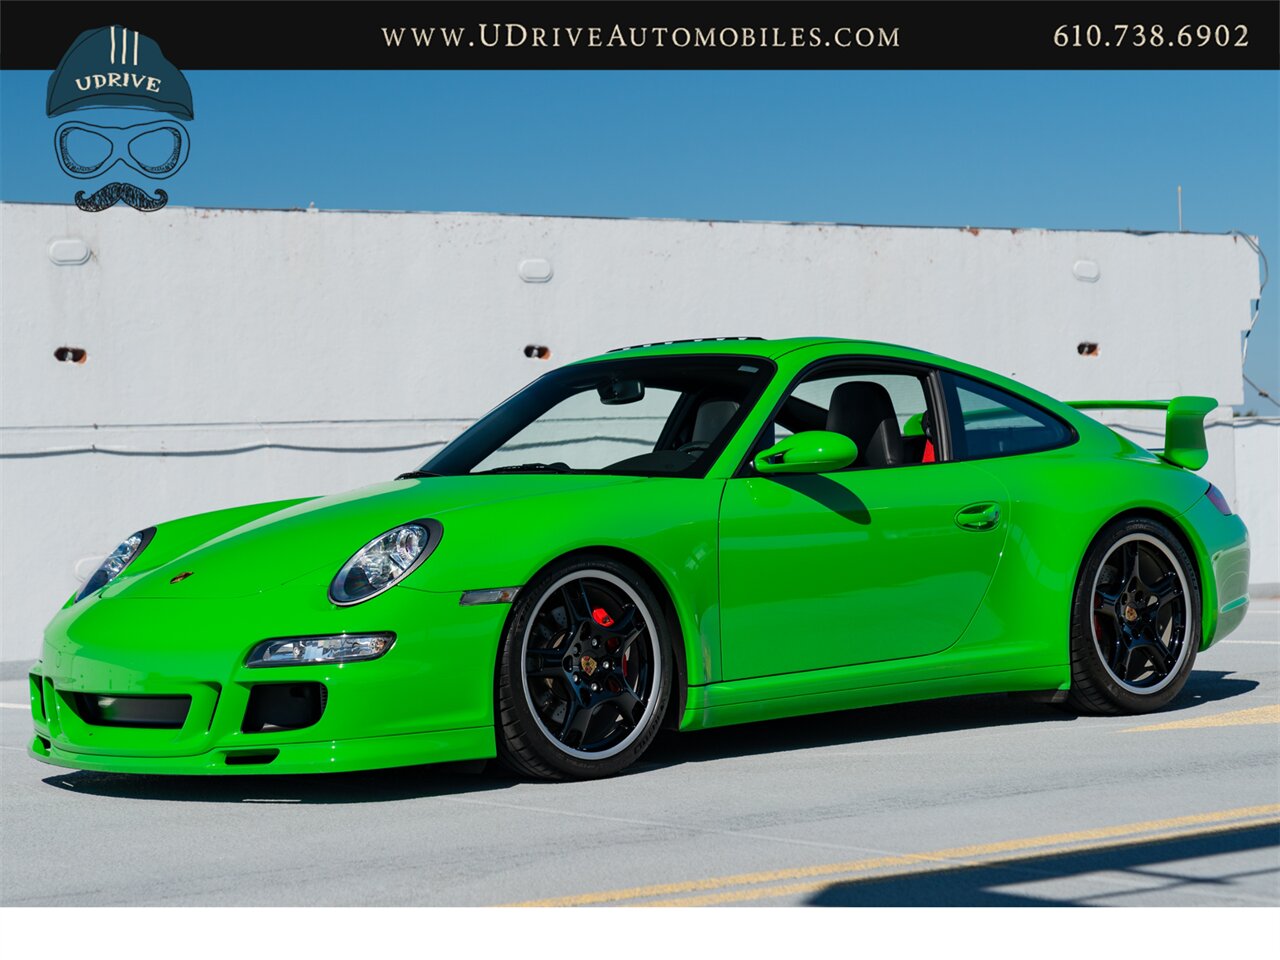 2006 Porsche 911 Carrera 4S  997 PTS Signal Green 6Sp Sport Sts Spt Chrono Spt Exhst - Photo 12 - West Chester, PA 19382